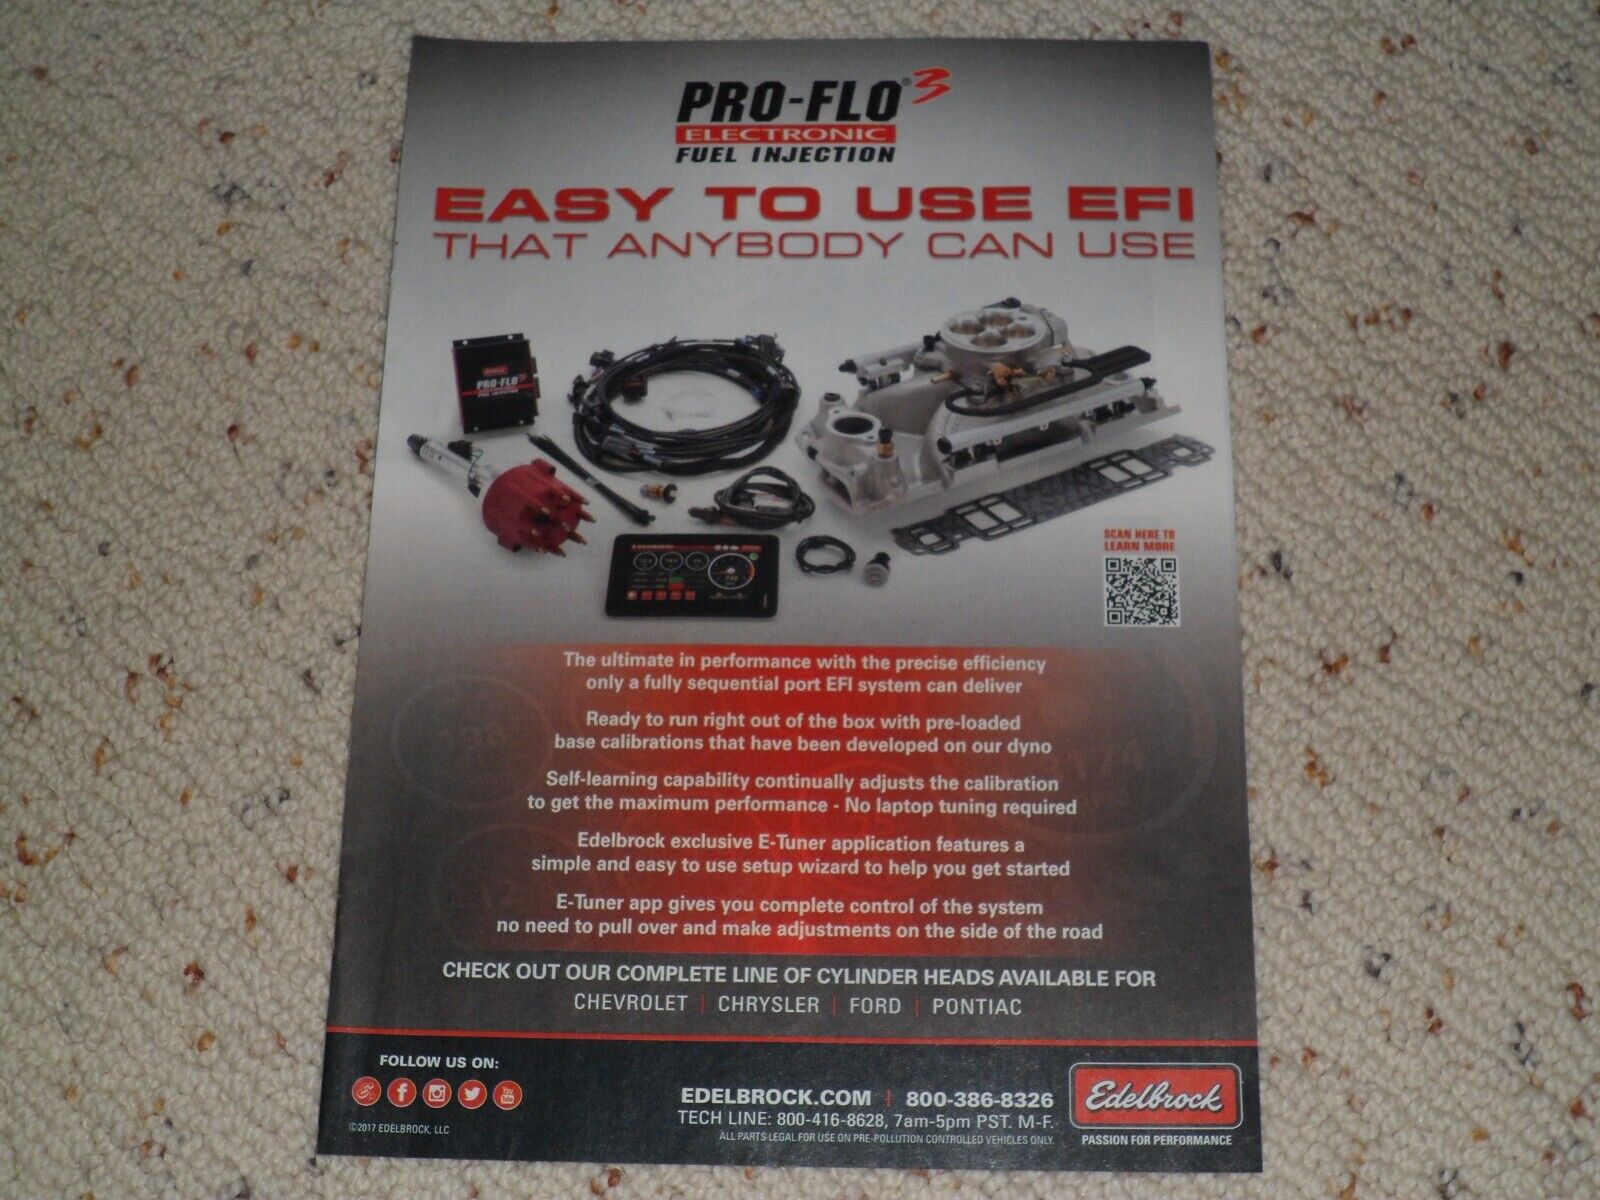 2017 EDELBROCK PRO-FLO ELECTRONIC FUEL INJECTION AD / ARTICLE